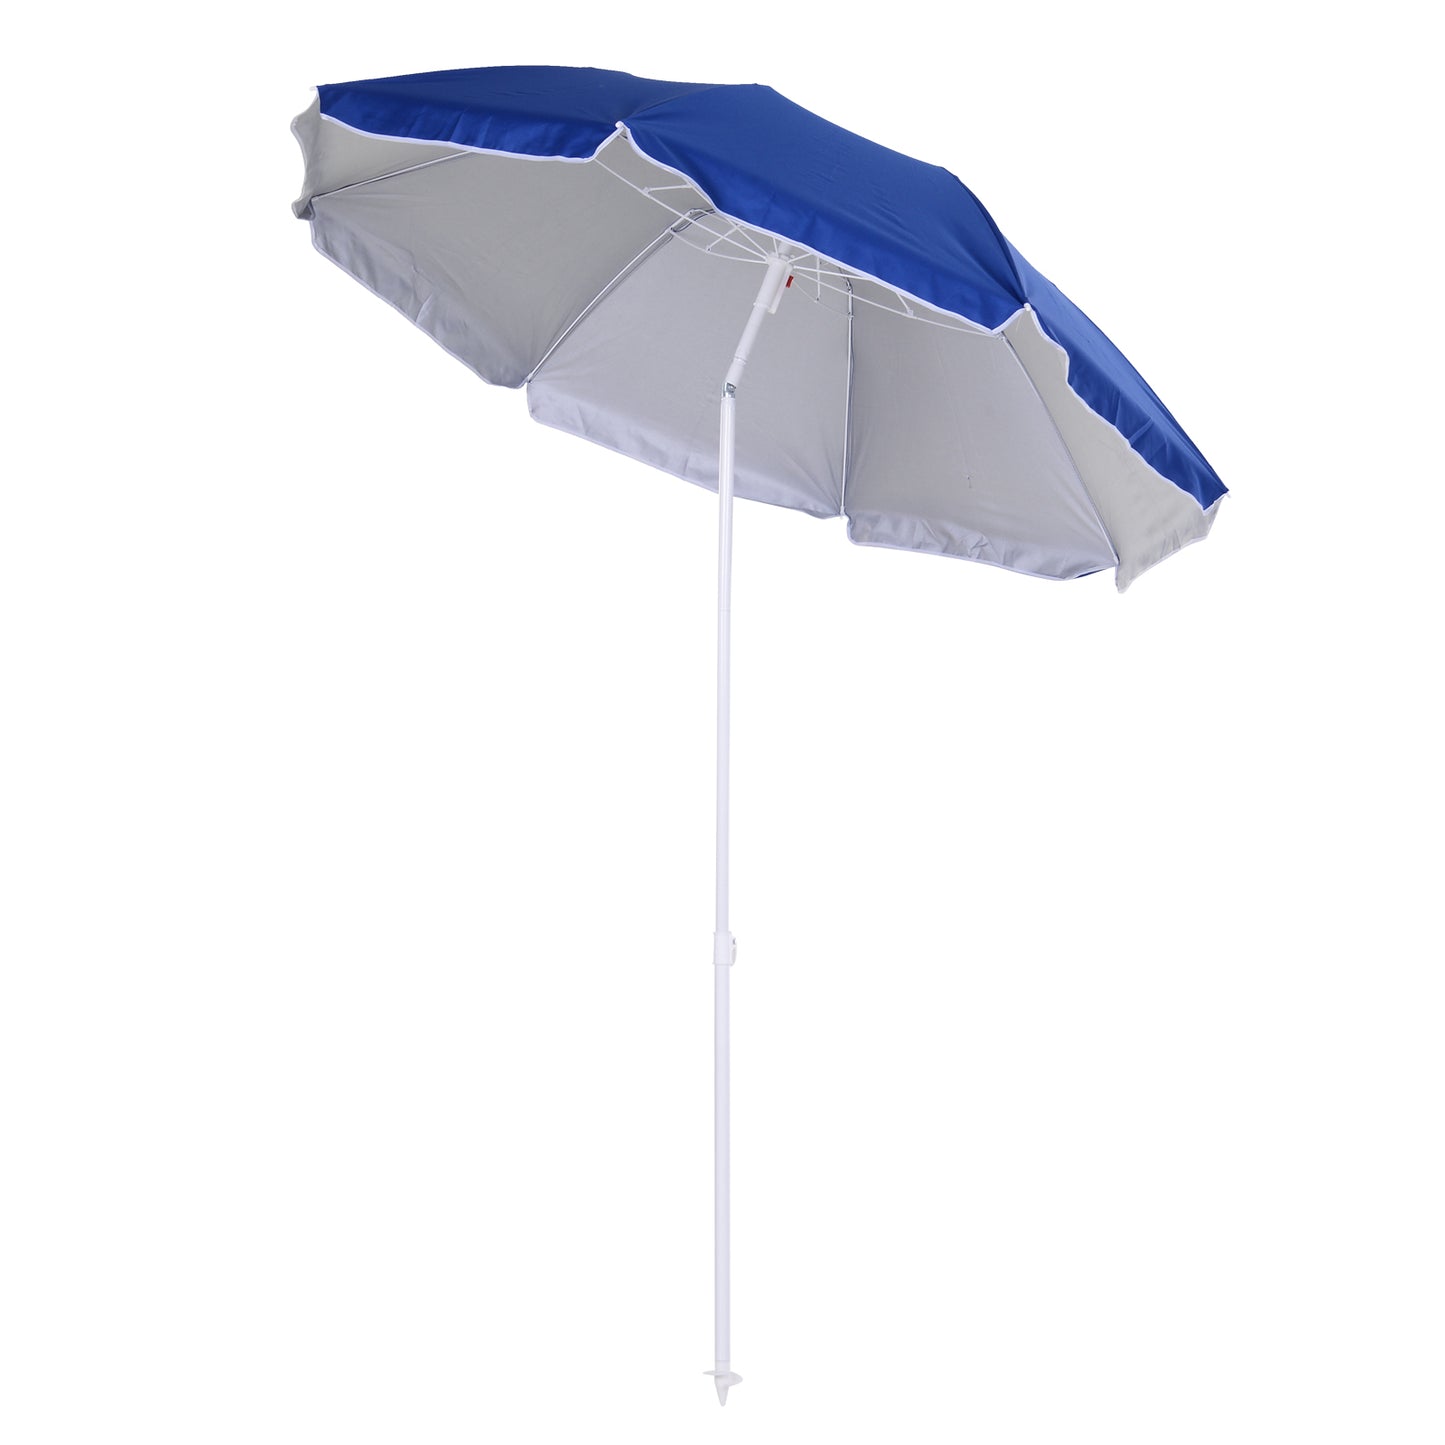 Outsunny 1.7m x 2m Tilted Steel Frame Beach Parasol Blue